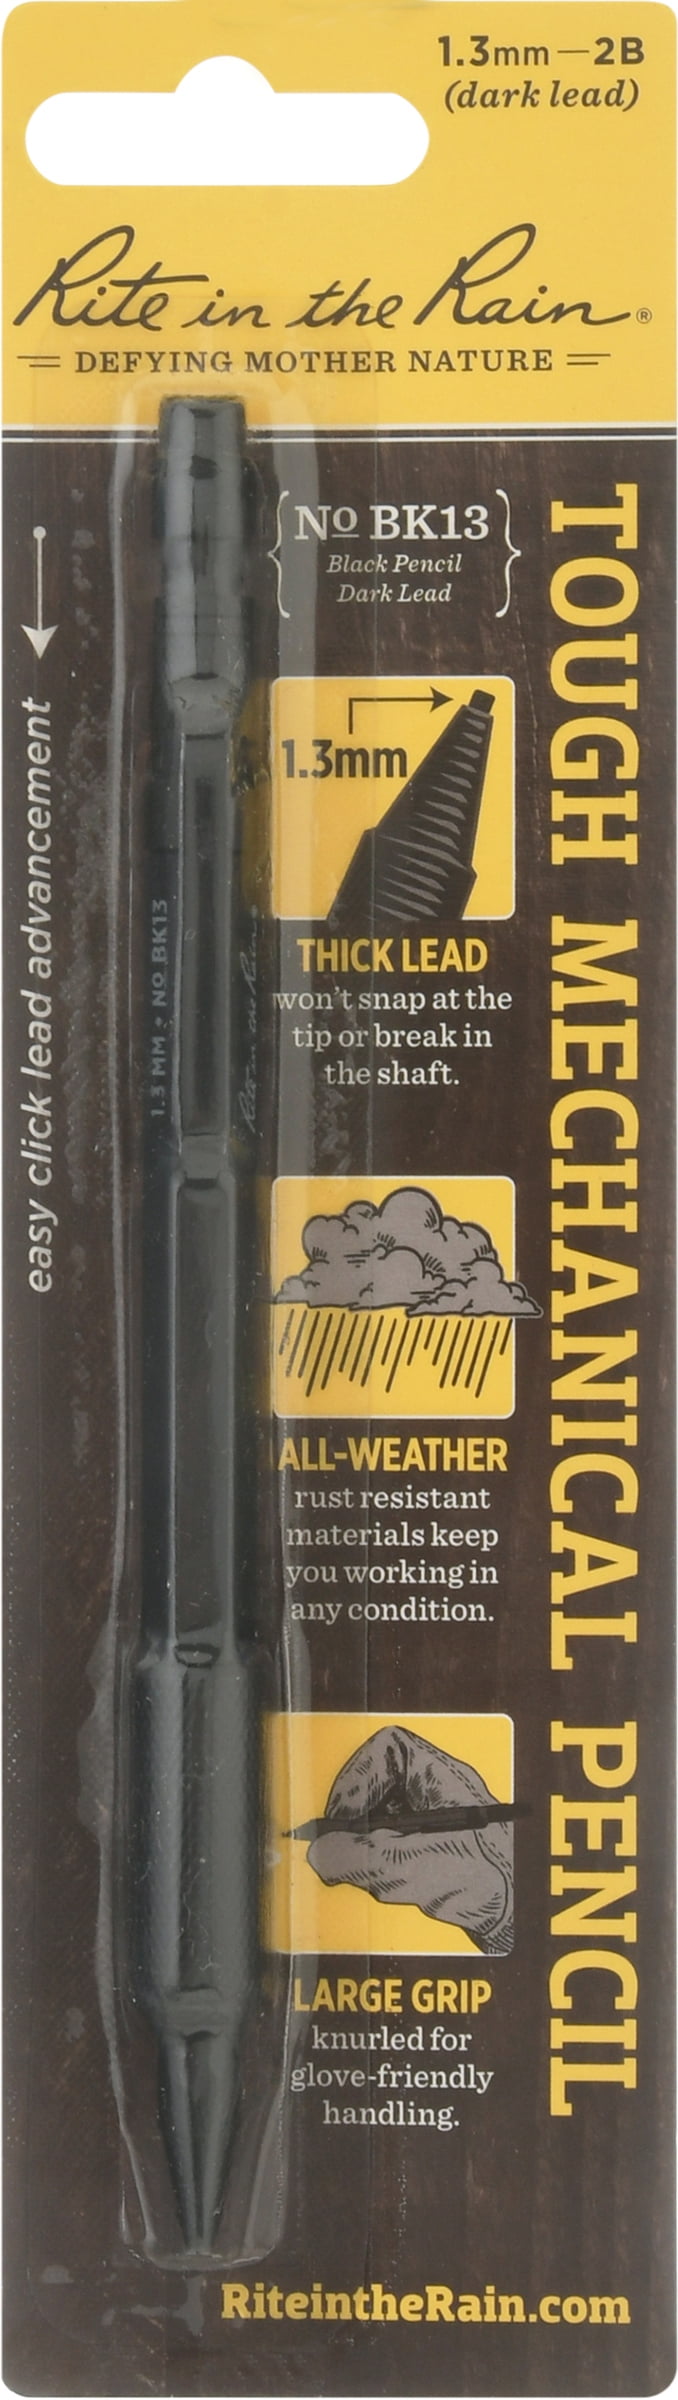 Propelling Pencil NEW FROM RITE IN THE RAIN! Rite in the Rain Tough Mechanical 